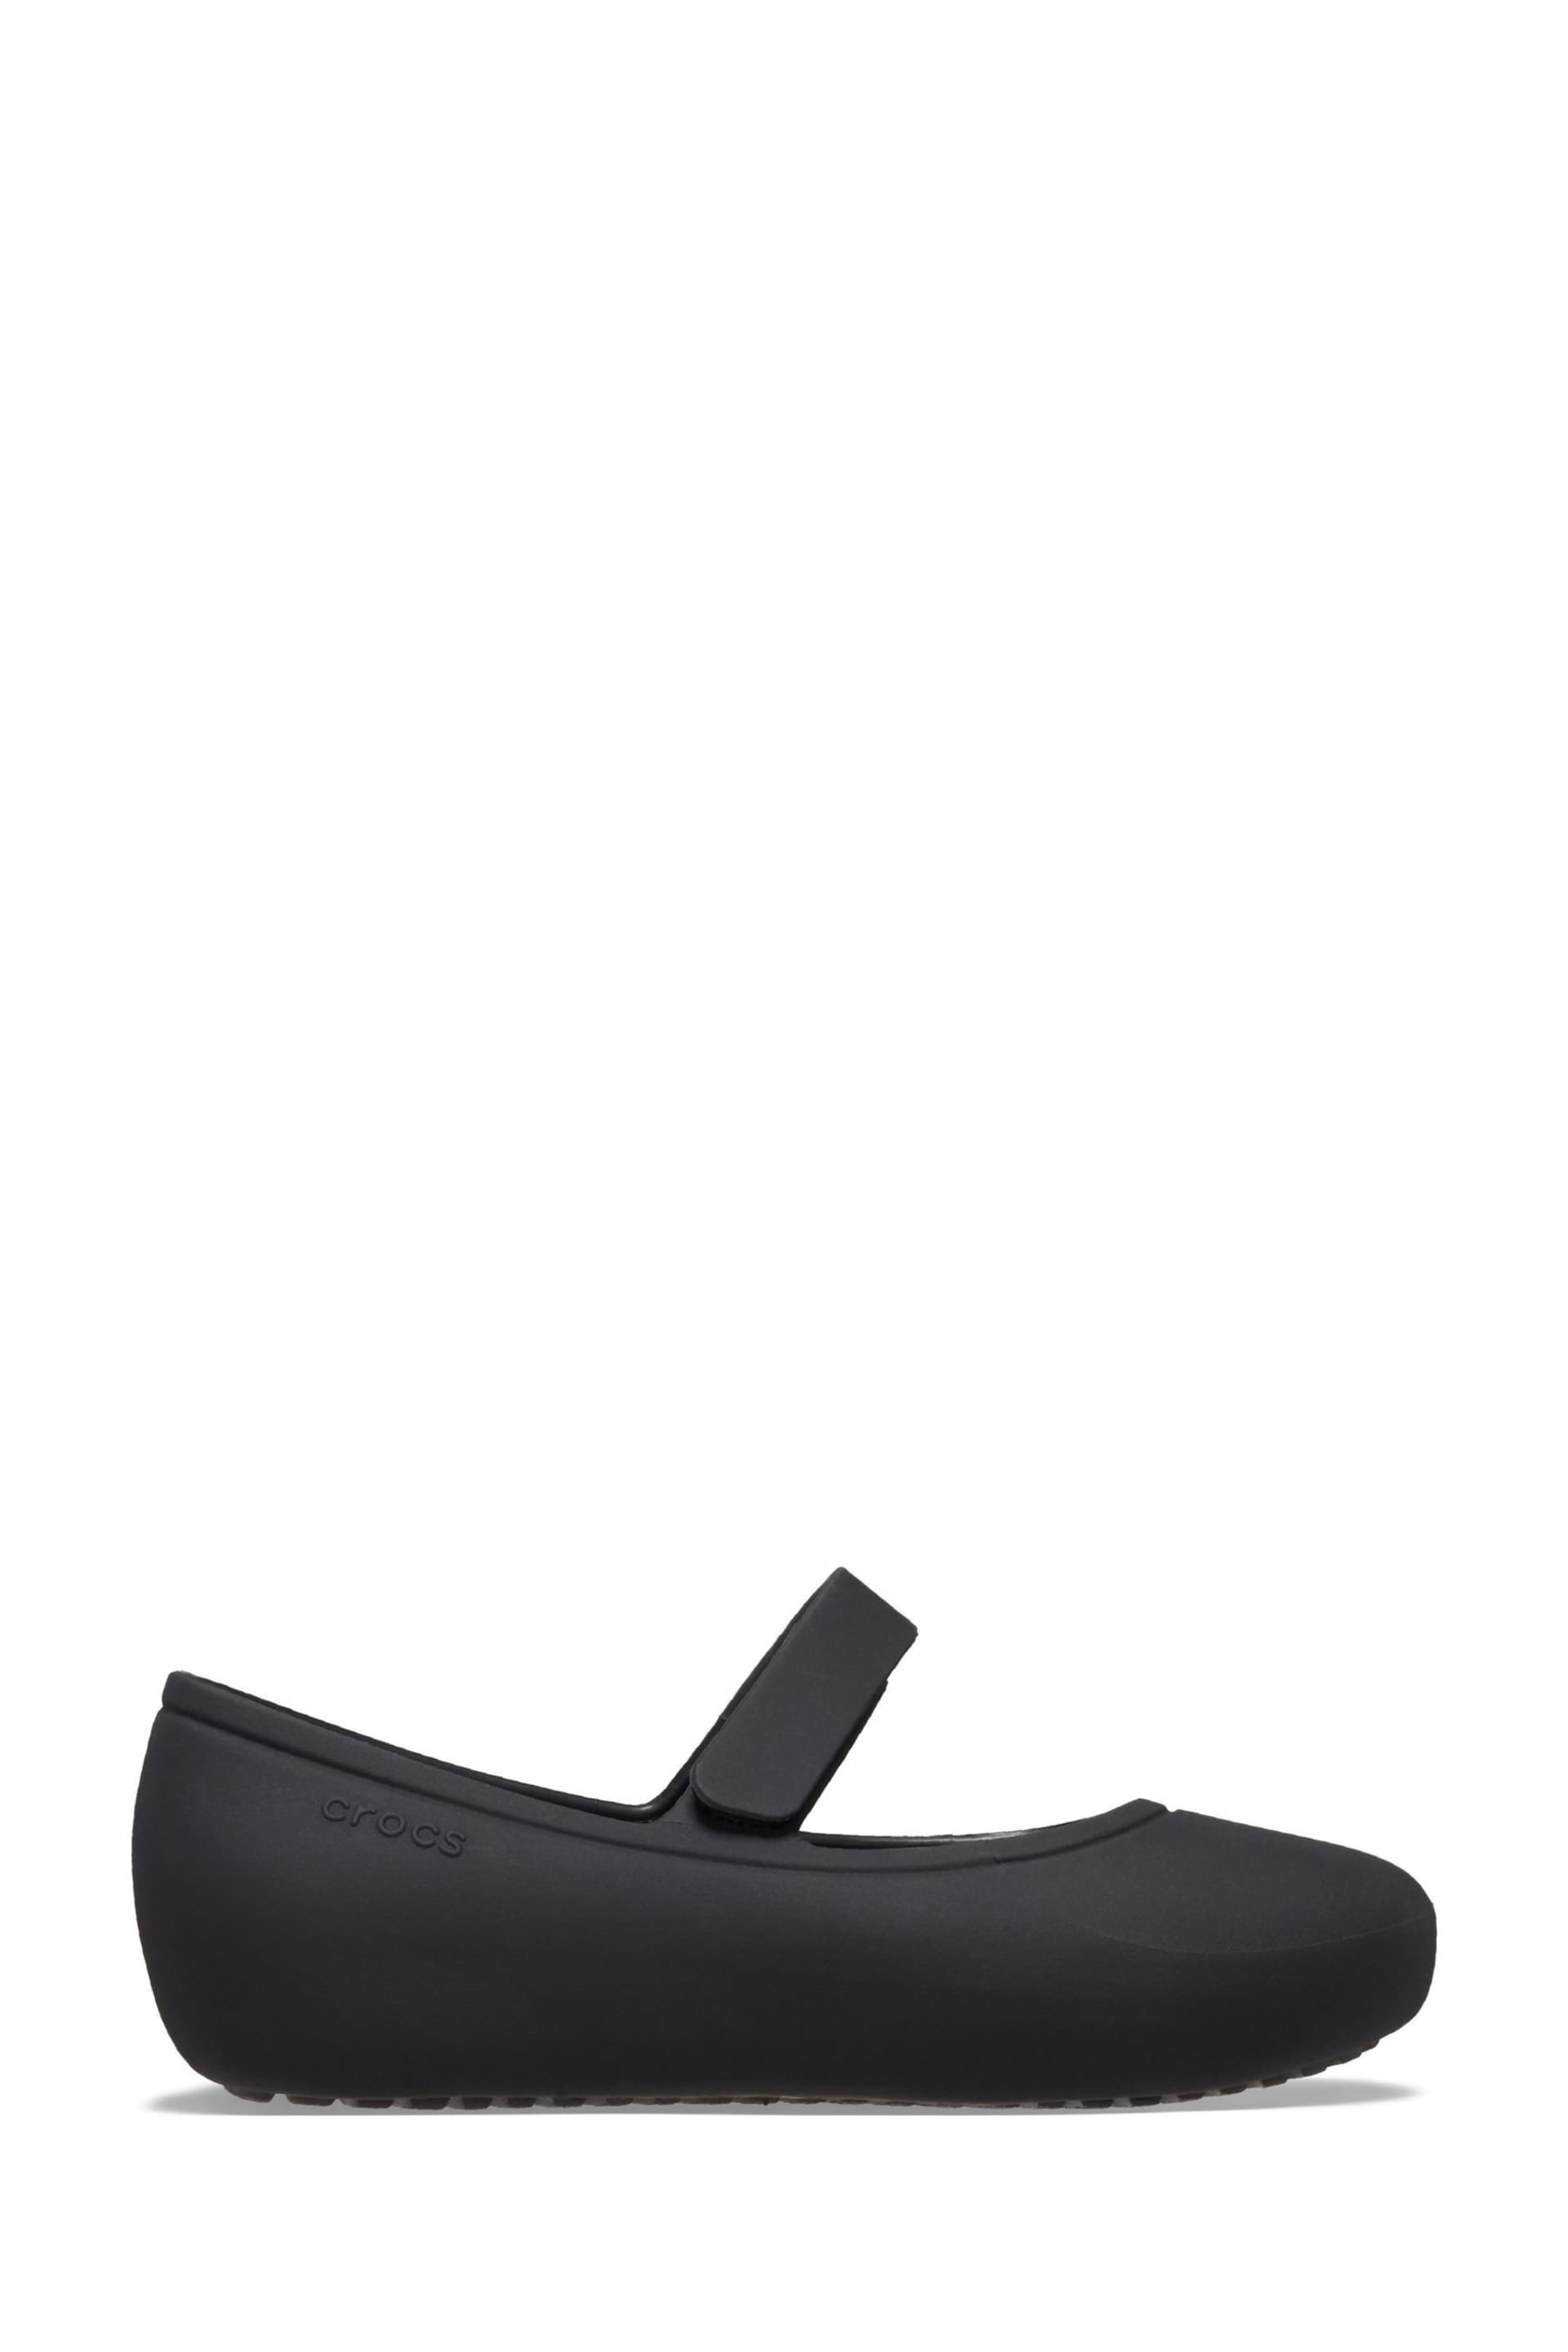 Crocs Brooklyn Mary Jane Toddler Flat Black Shoes - Image 1 of 7